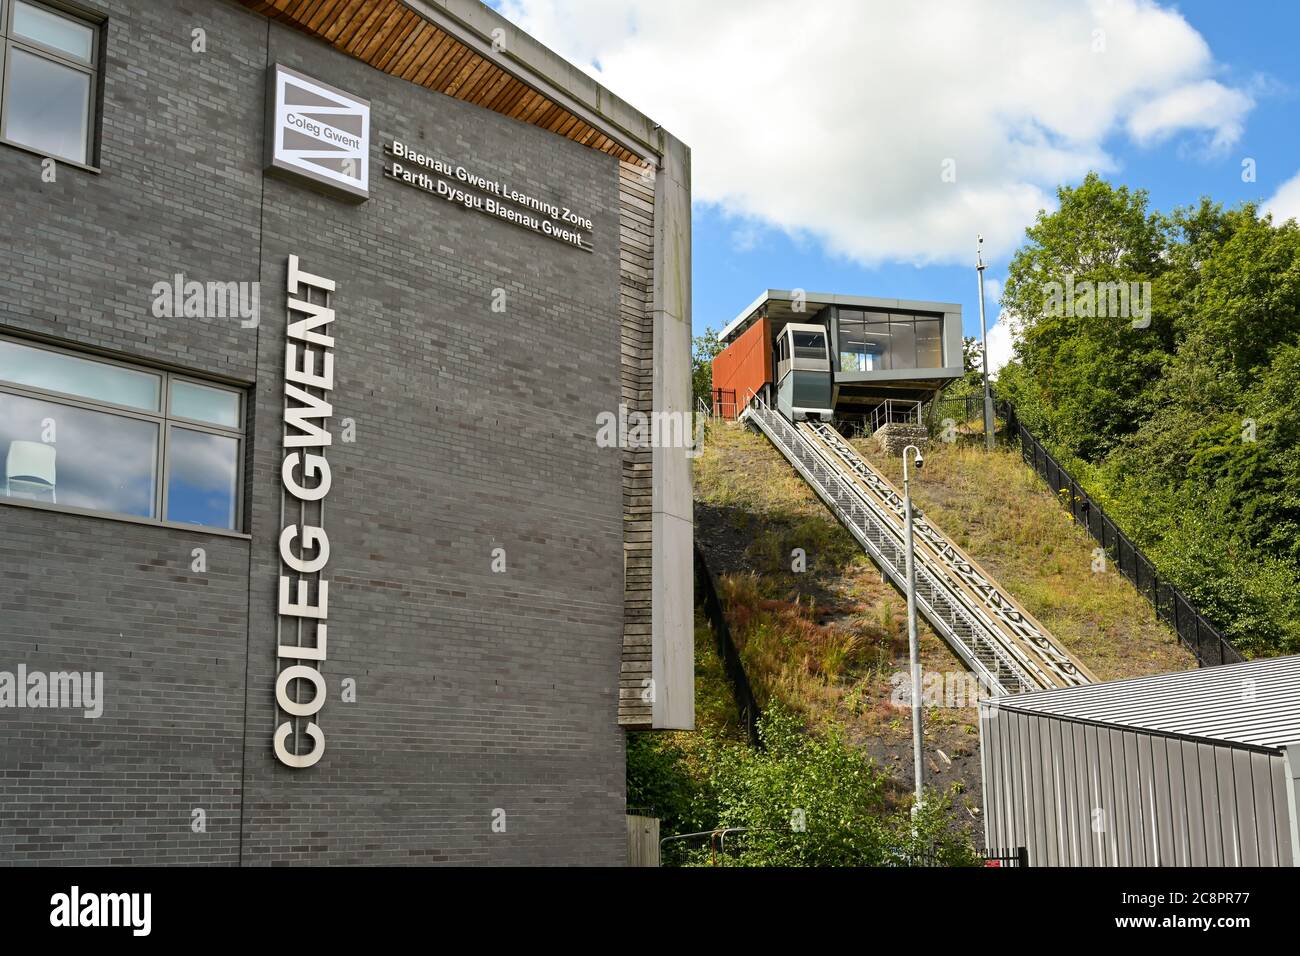 Ebbw Vale, Wales - July 2020: Building of the further education college 'Coleg Gwent'. In the background is the funicular railway which links the town. Stock Photo